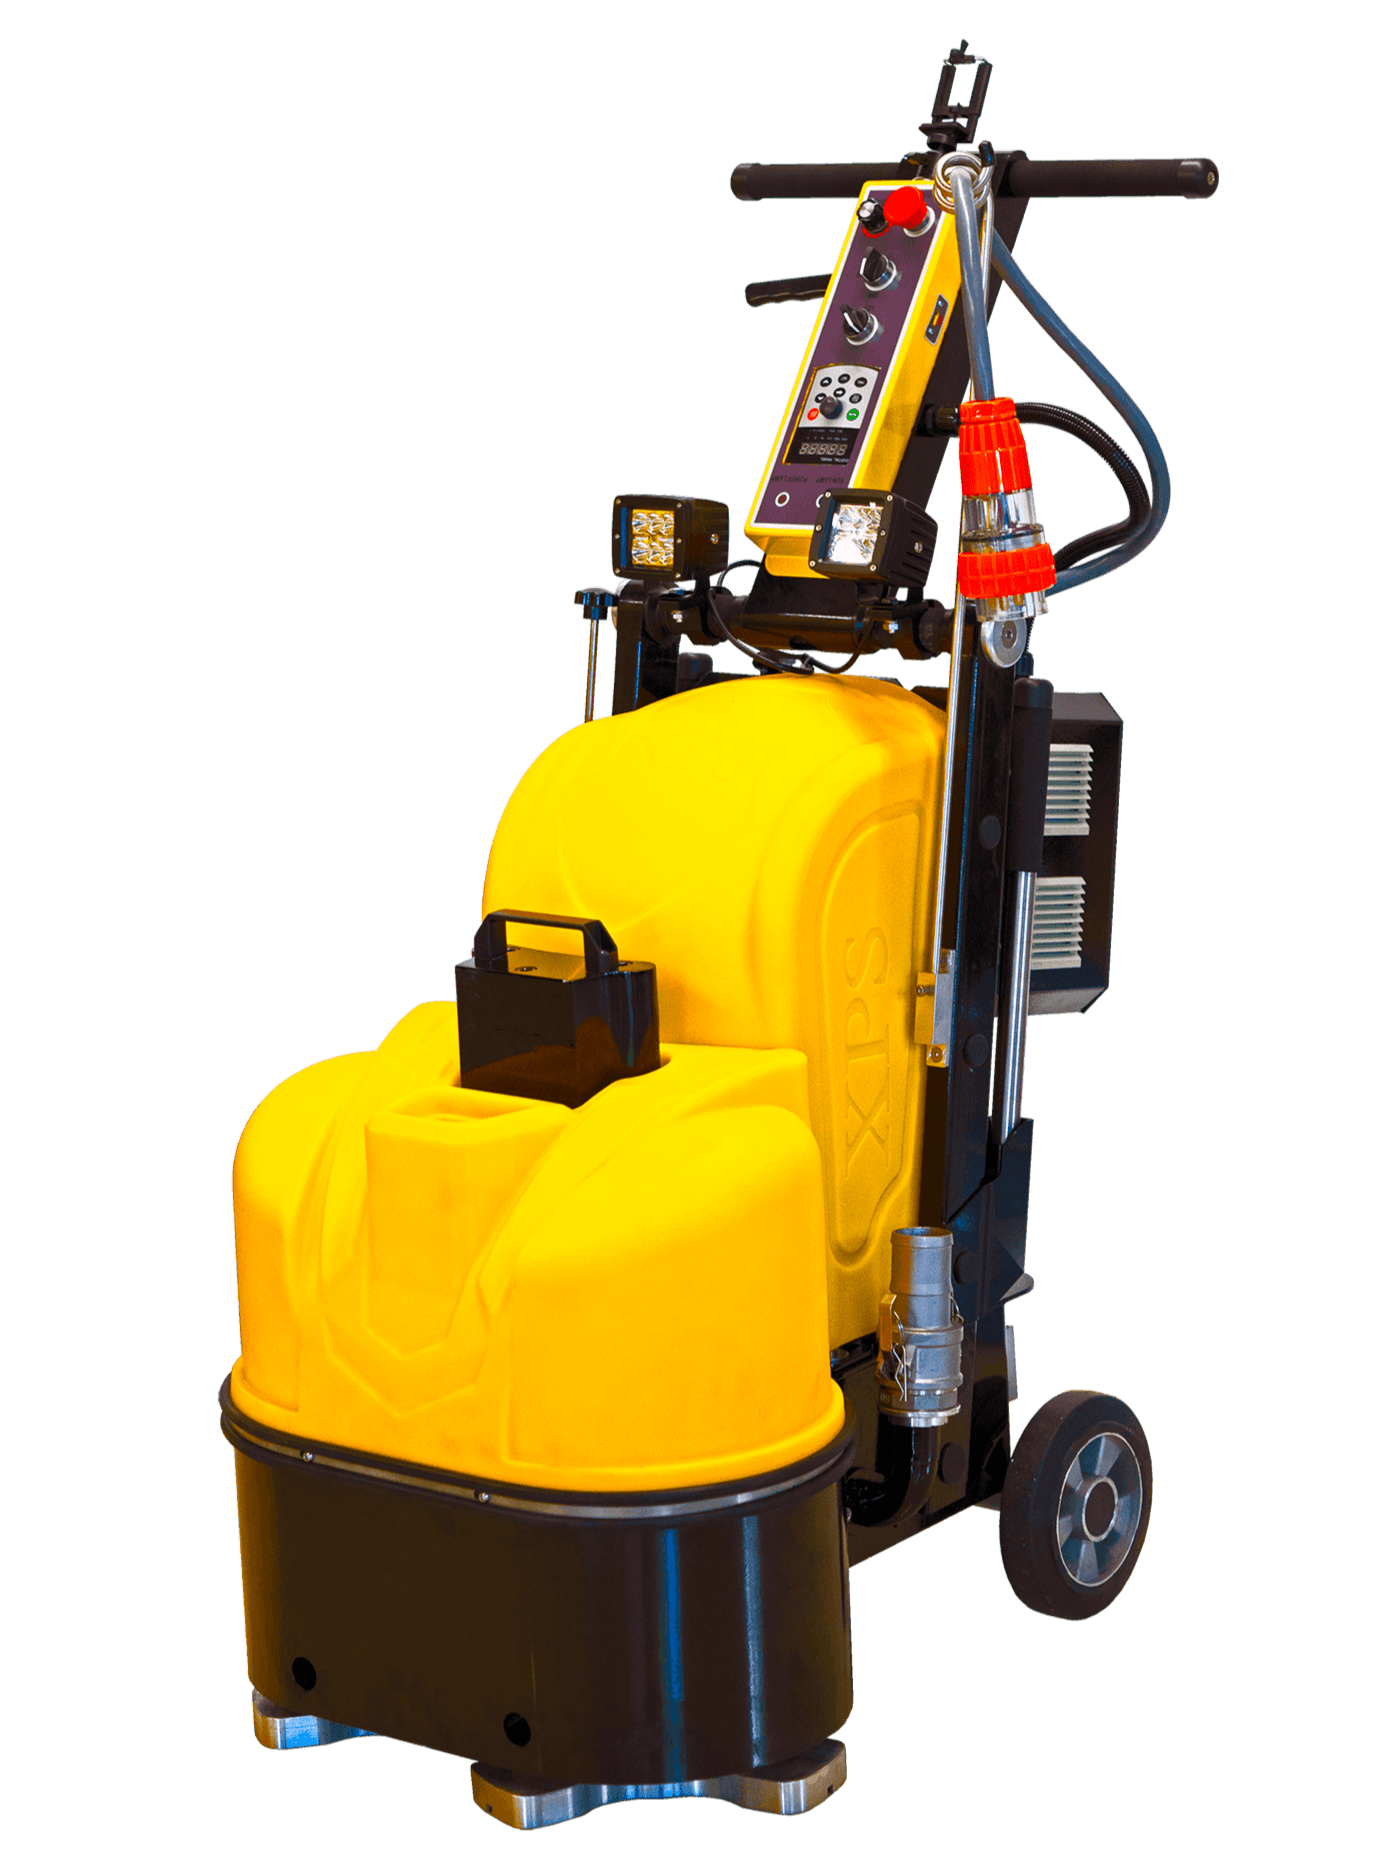 GENIE X550 CONCRETE FLOOR GRINDER - Xtreme Polishing Systems. Full collection of concrete grinders and polishers, cement grinders, concrete floor grinding, and concrete polishers.